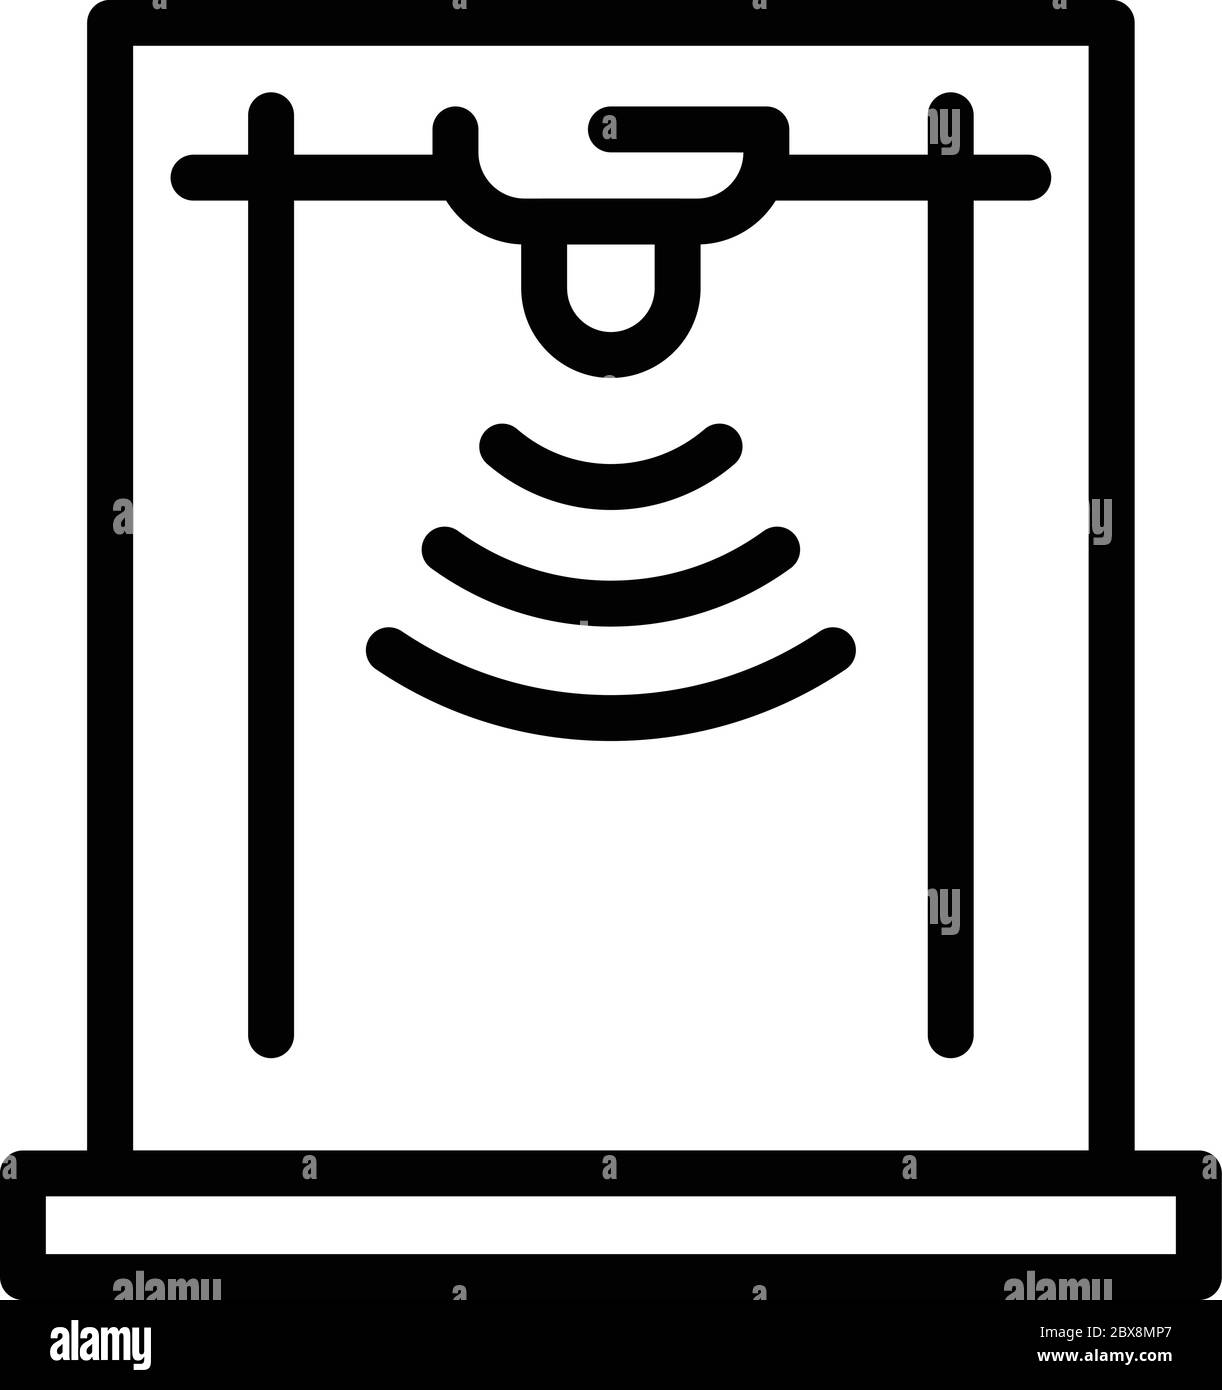 Wireless metal detector icon, outline style Stock Vector